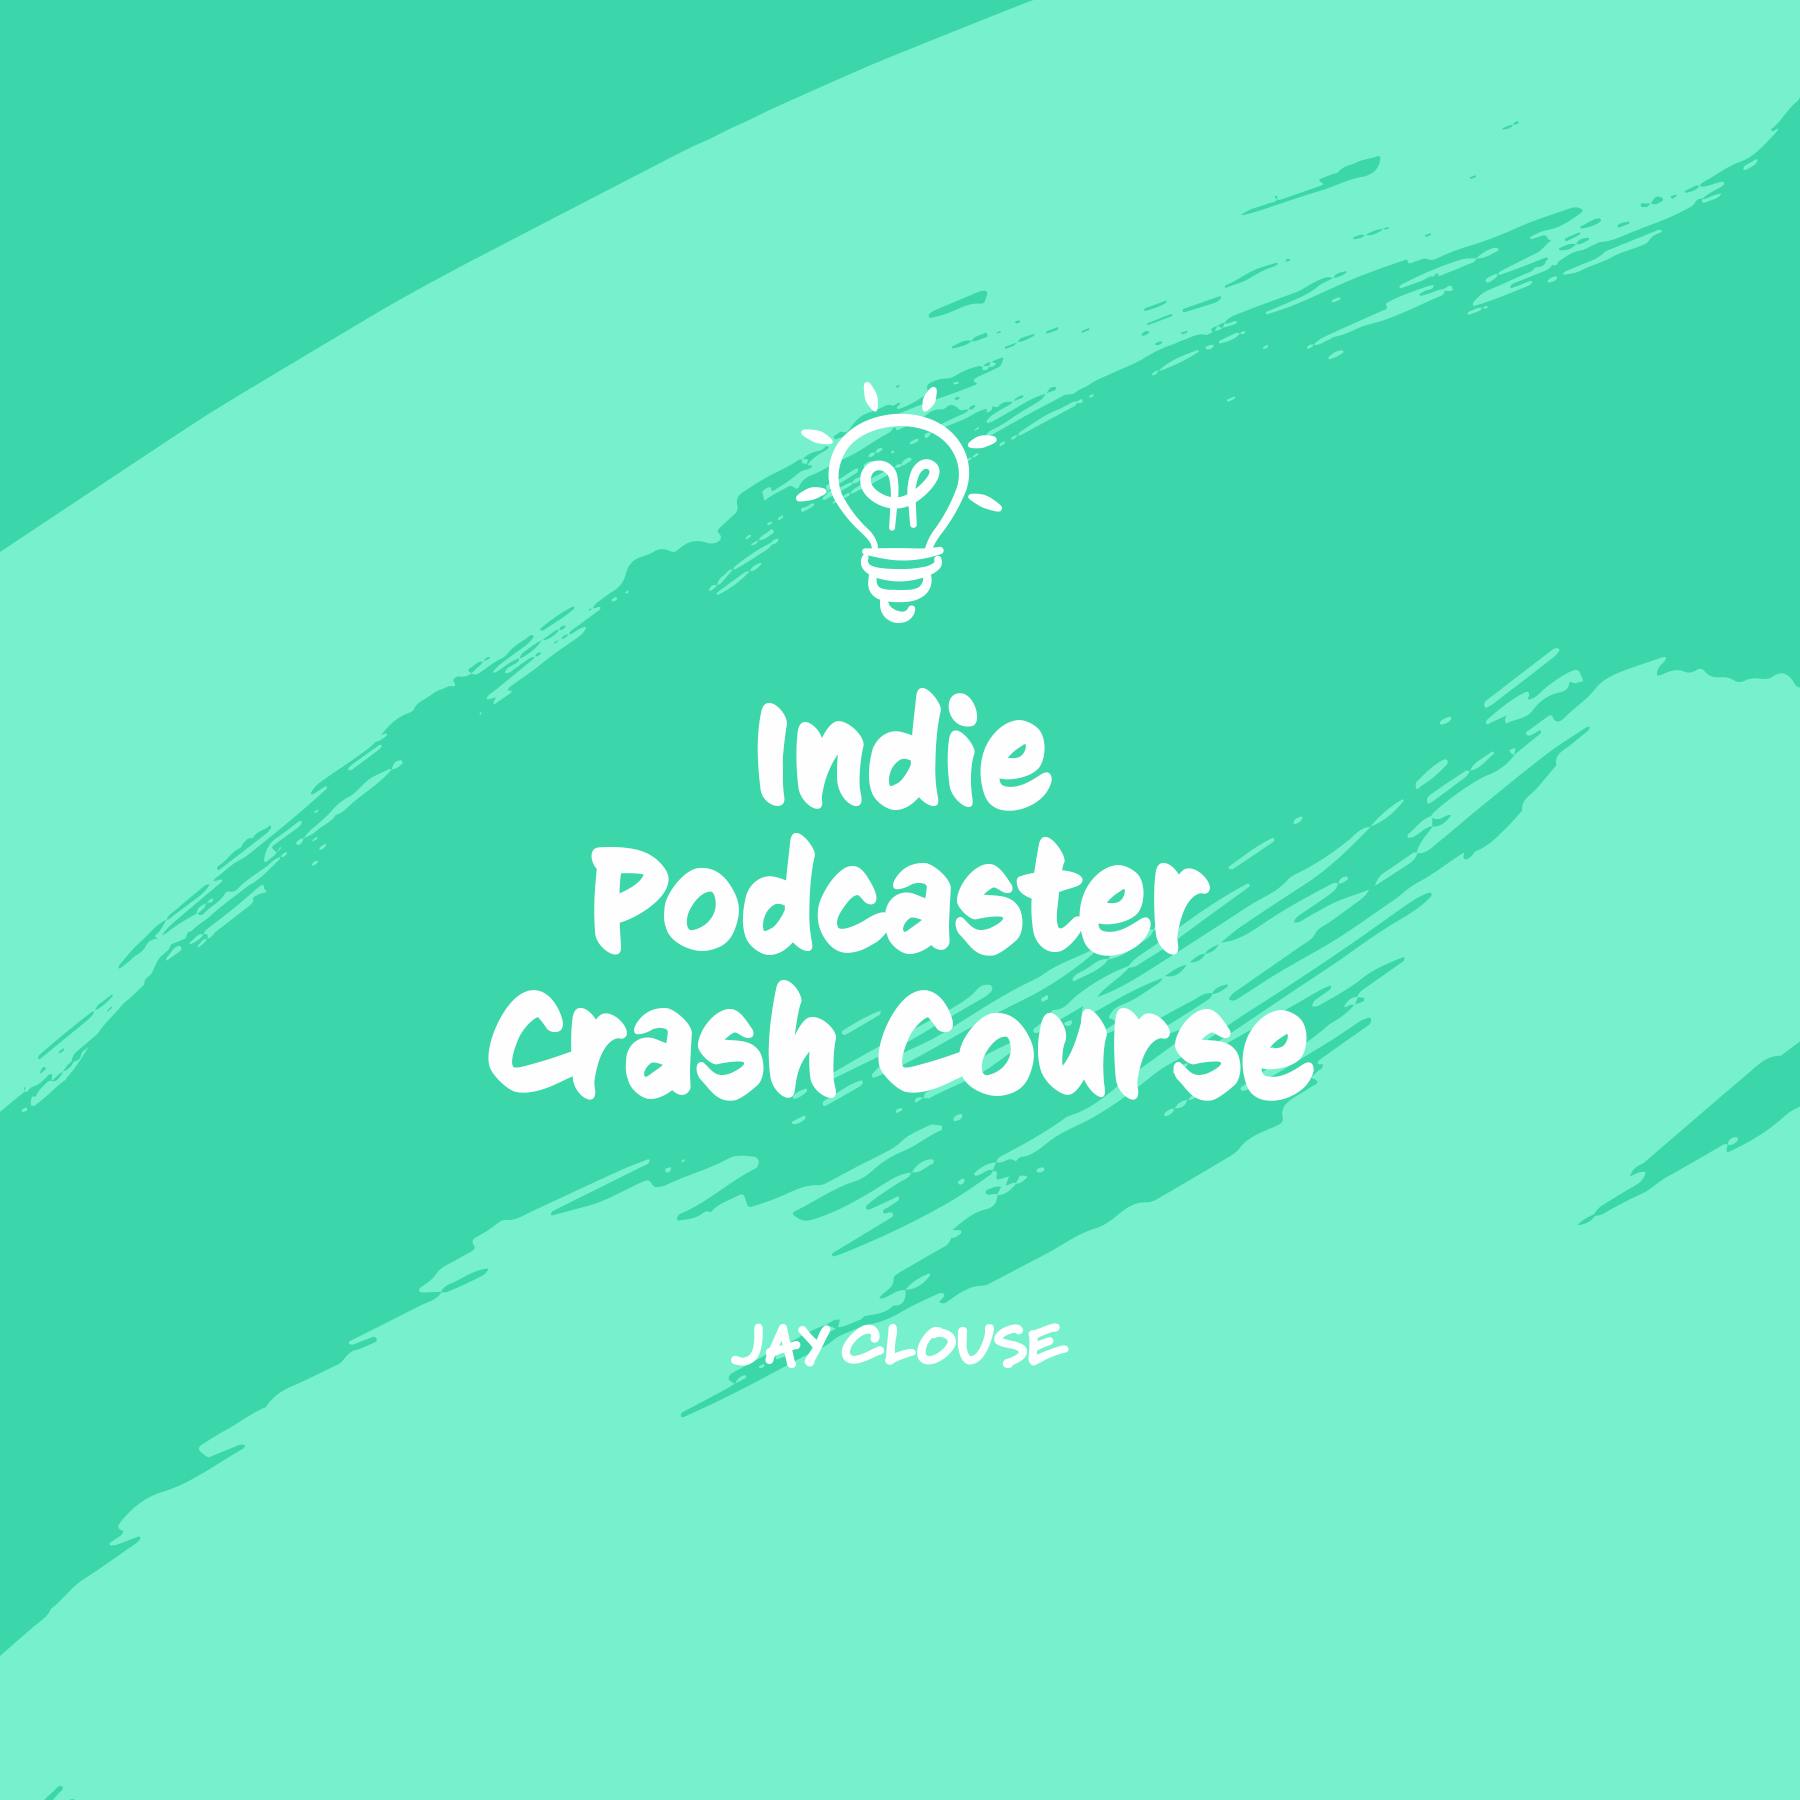 Indie Podcaster Crash Course